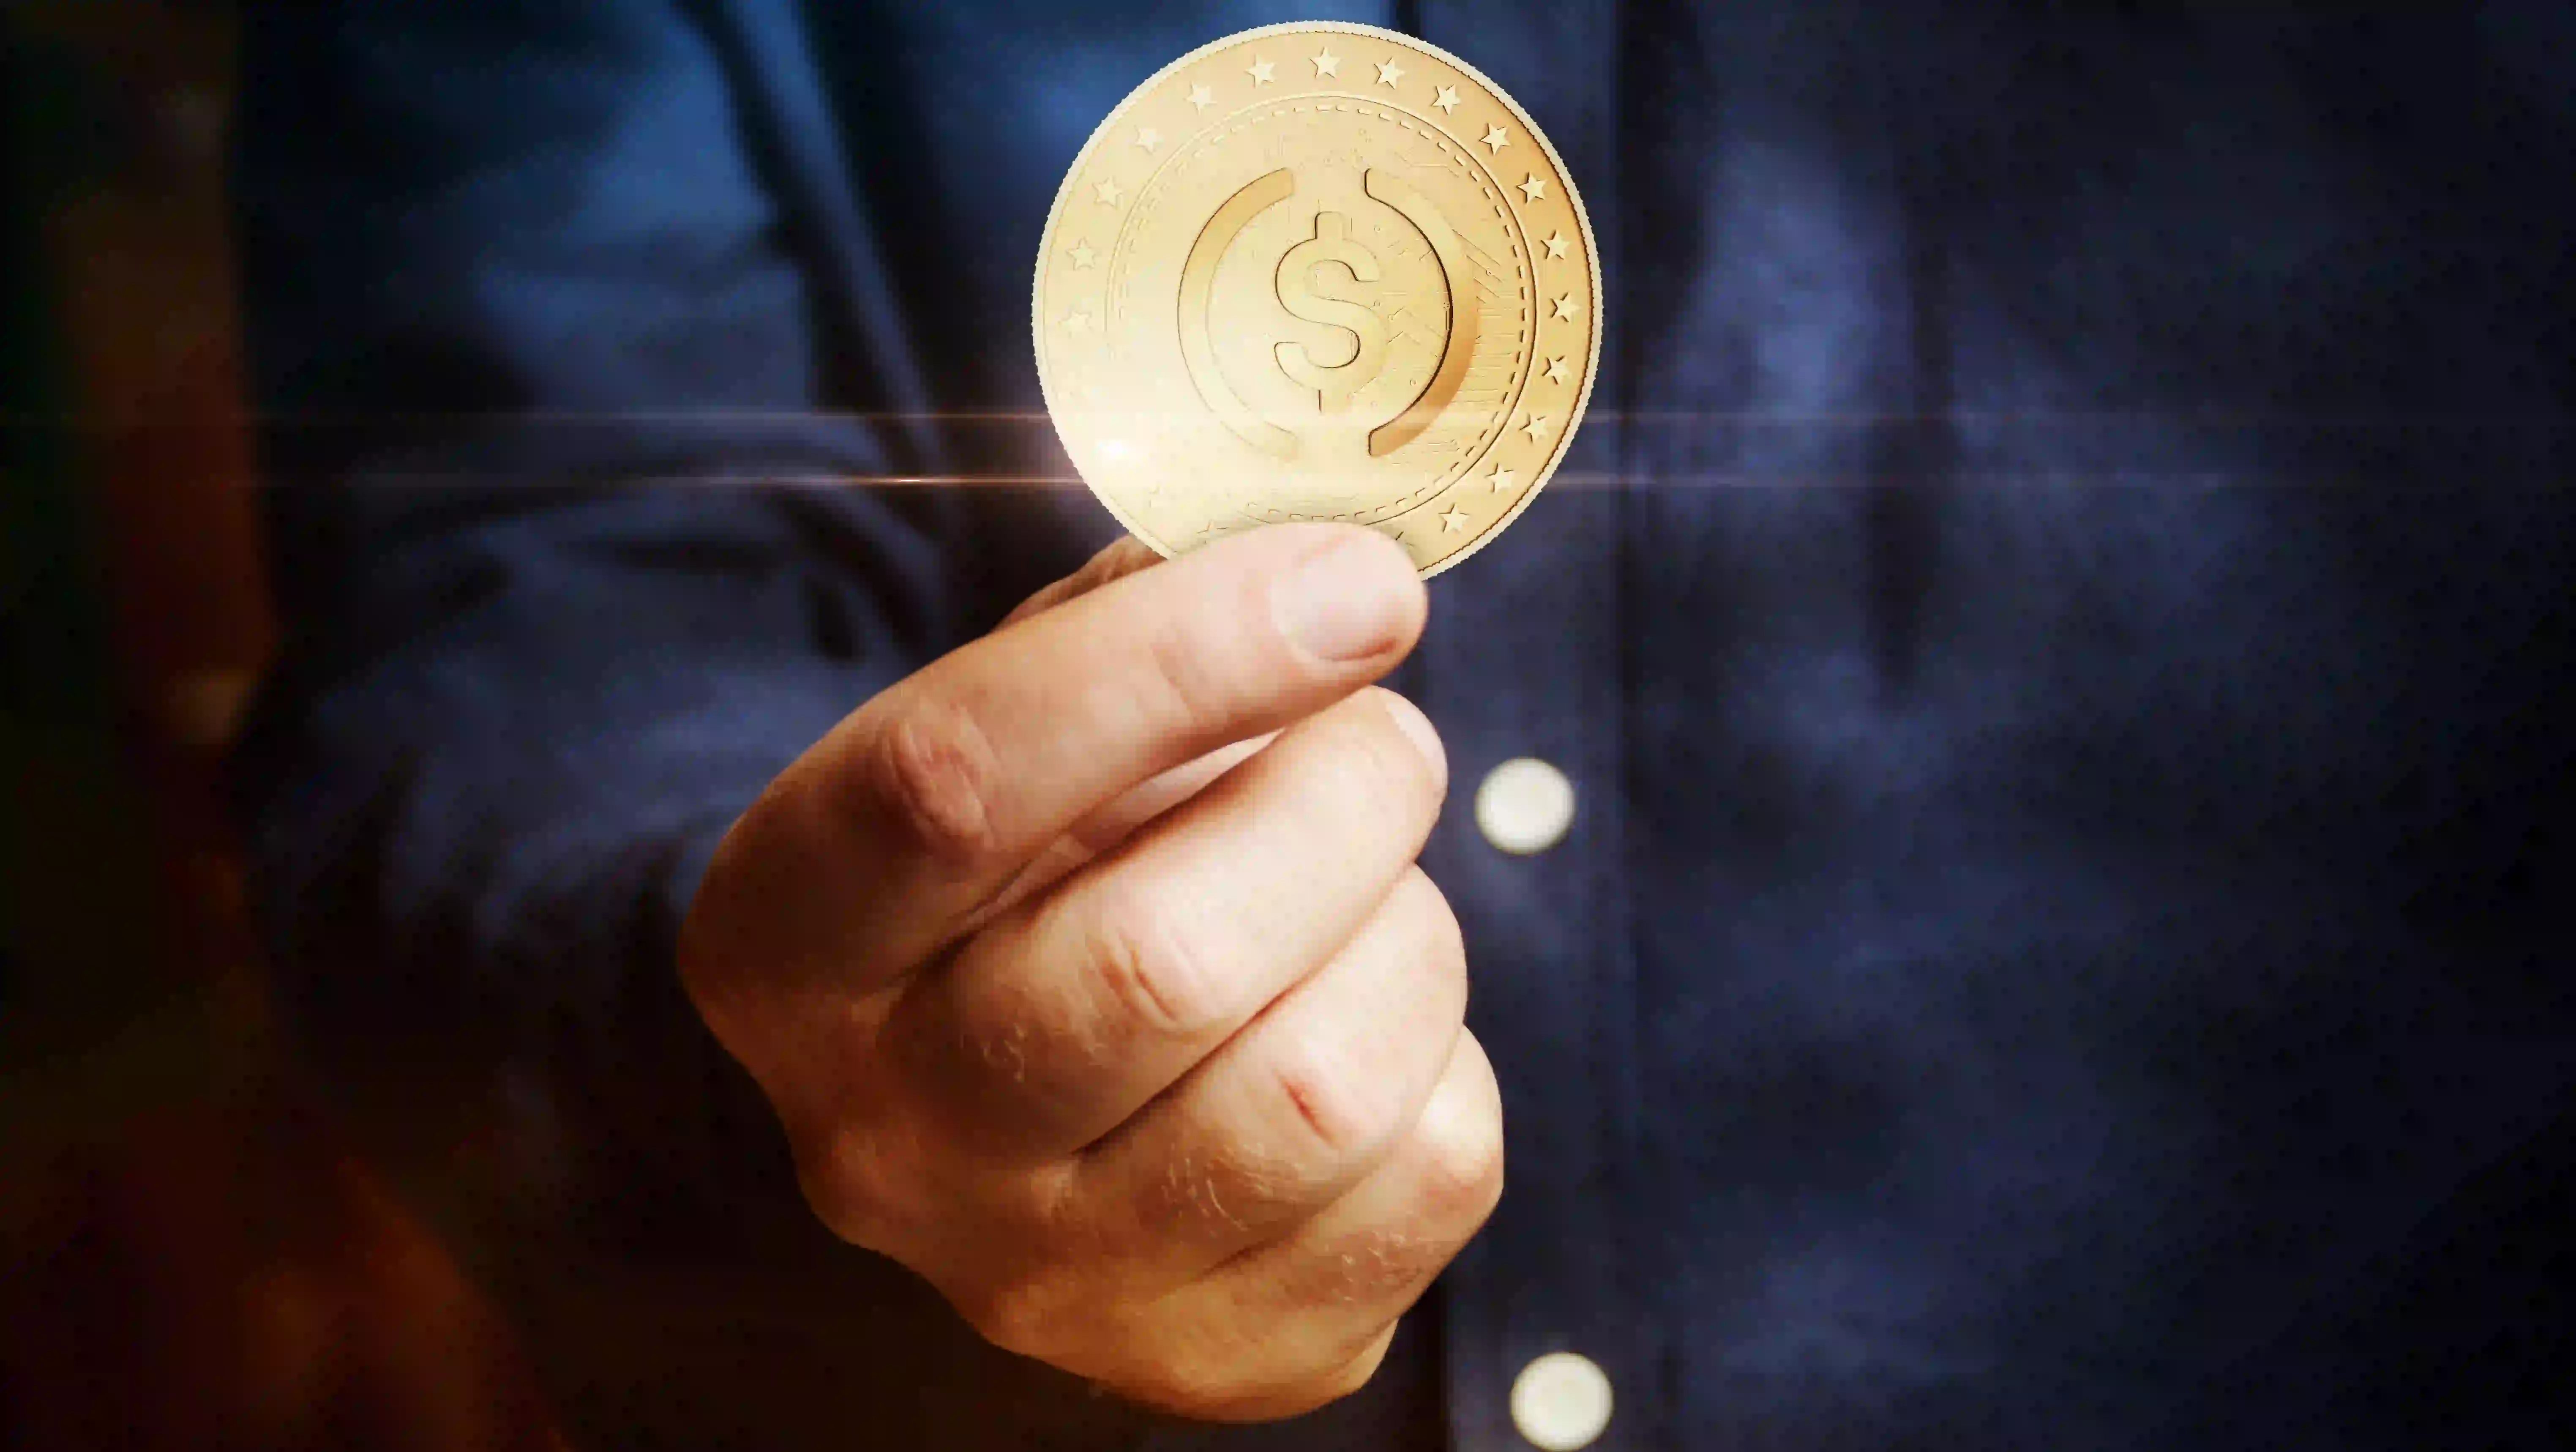 A hand holding a gold coin